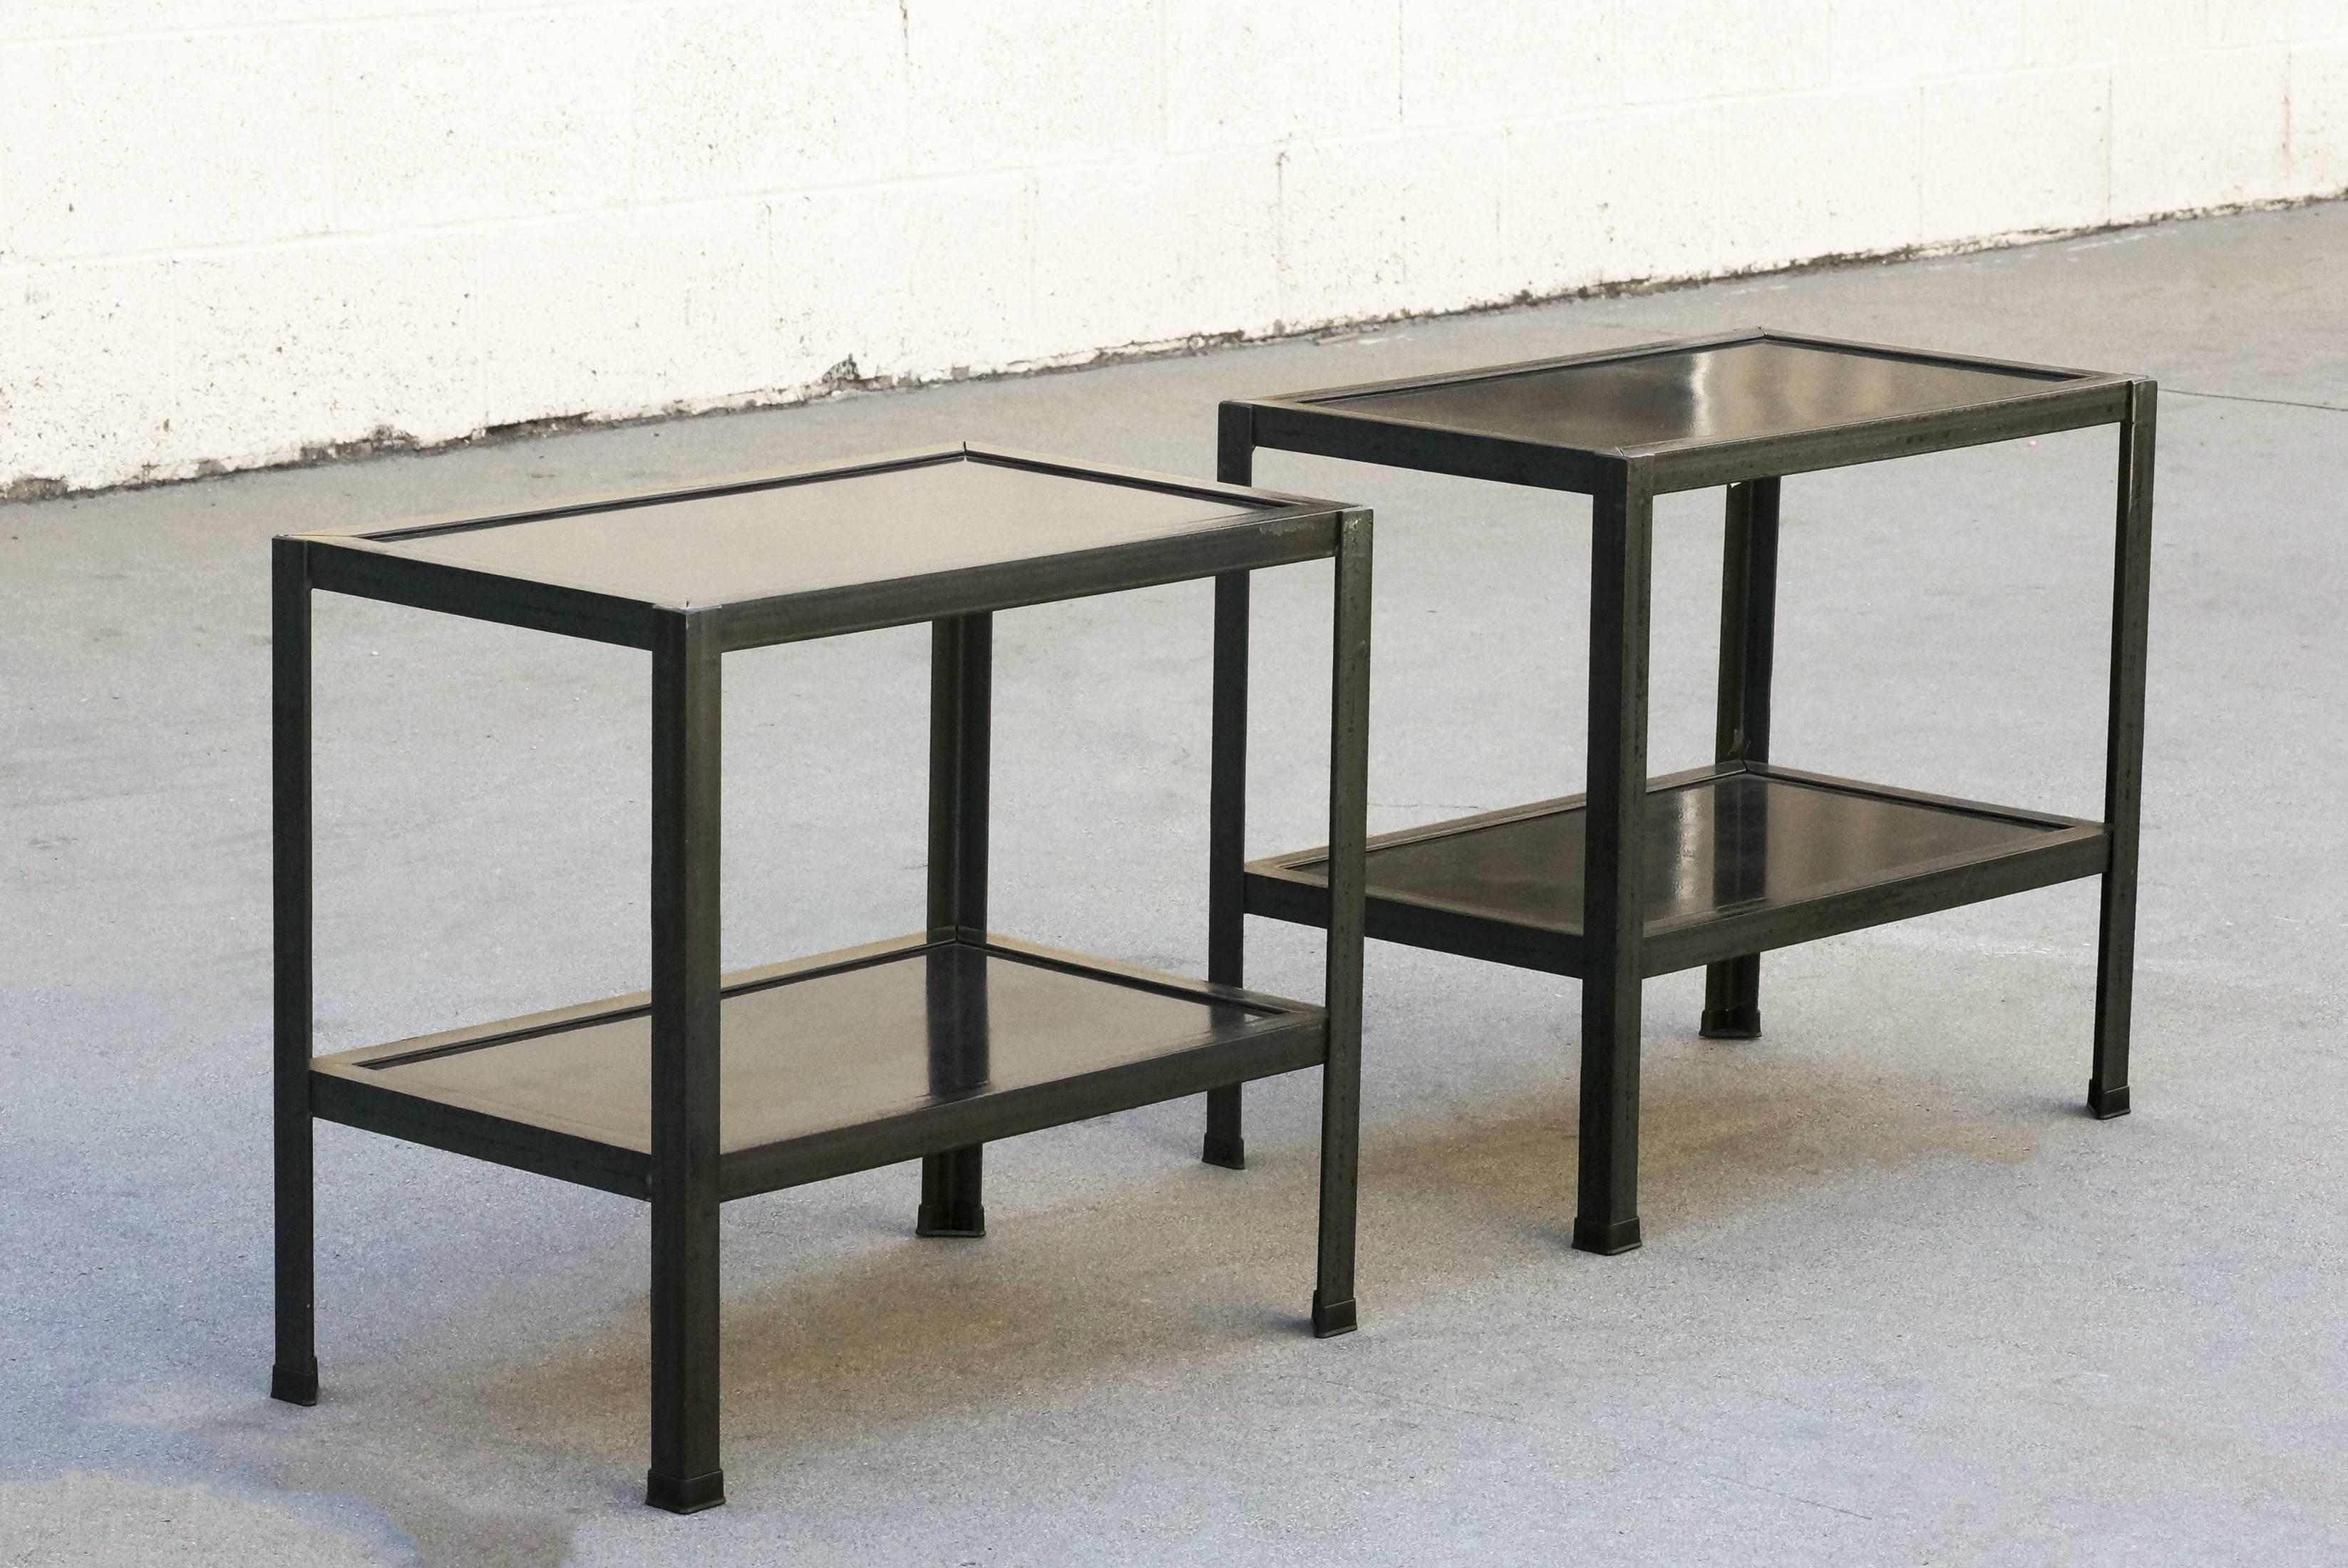 Industrial yet sleek steel side tables by Rehab Vintage Interiors, Los Angeles. Designed in the spirit of the Machine Age our side tables are built with 1